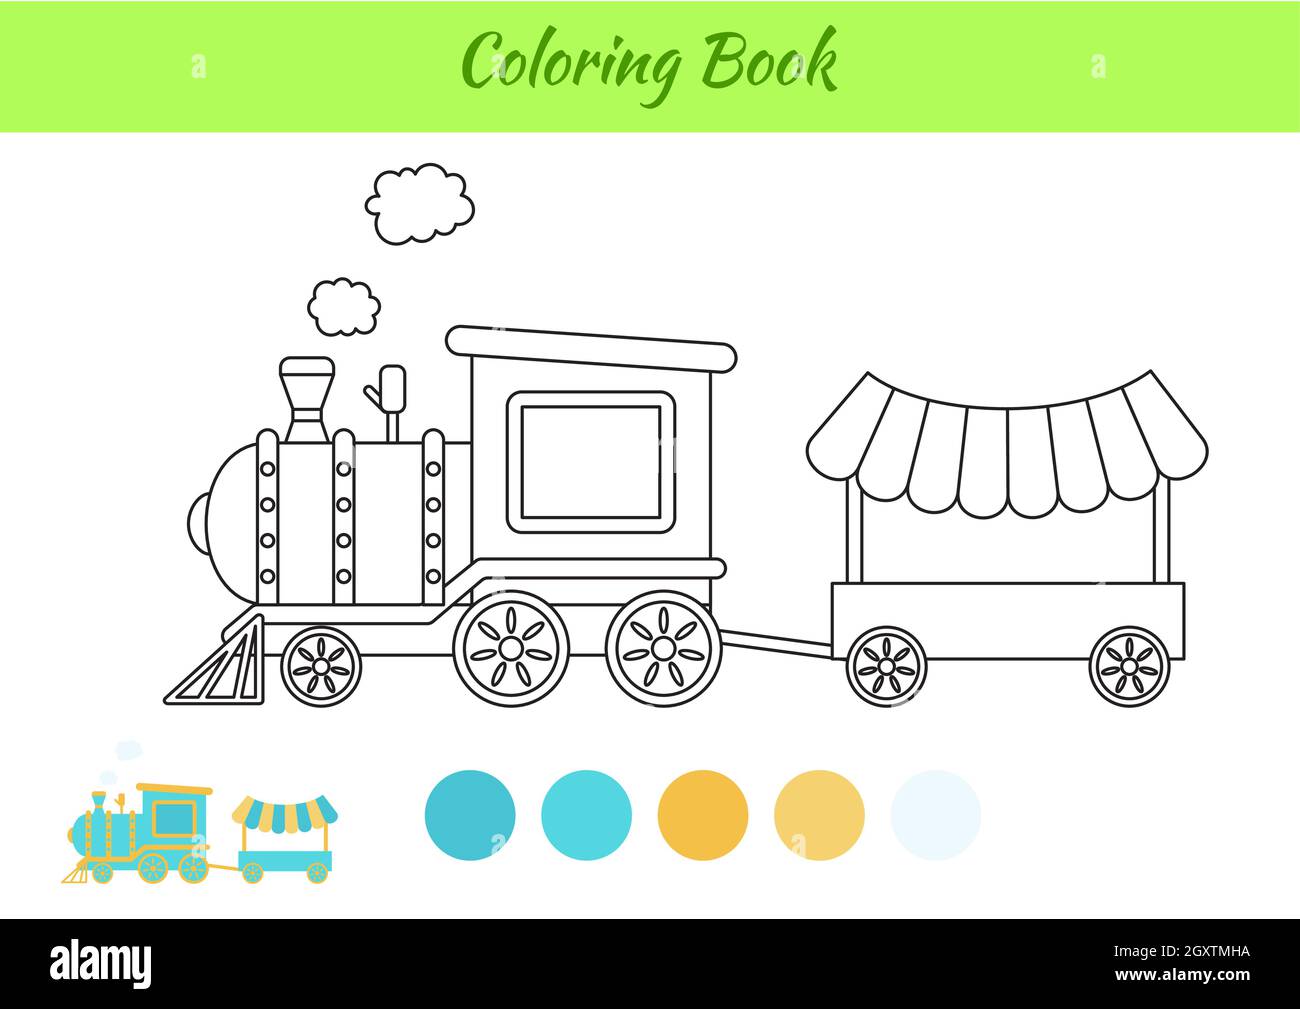 Coloring book train for kids printable worksheet educational activity page for preschool years kids and toddlers with transport cartoon colorful ve stock vector image art